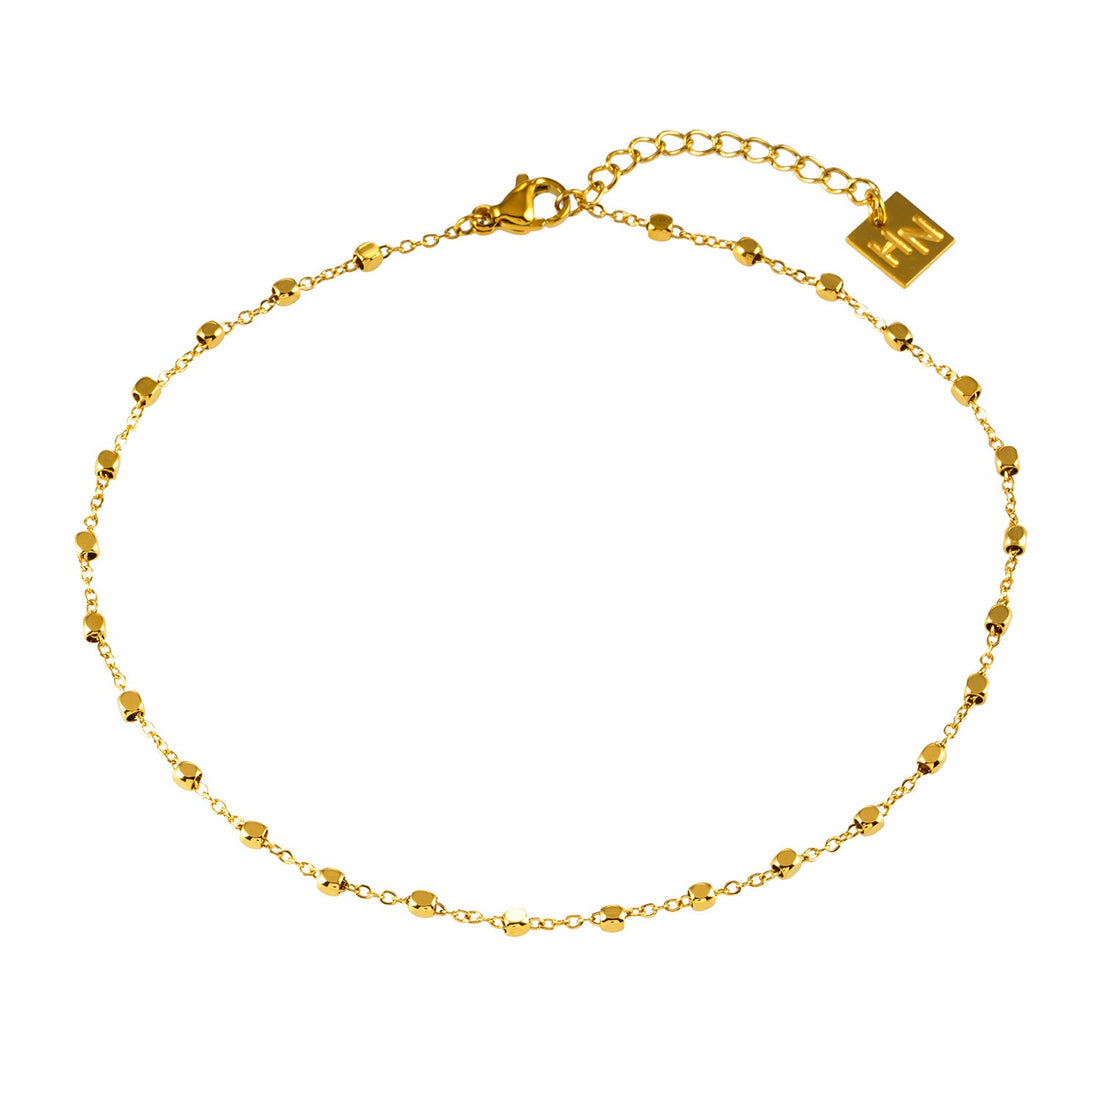 Hackney Nine DEMELZA LG Contemporary Gold Anklet with Delicate Square Beads